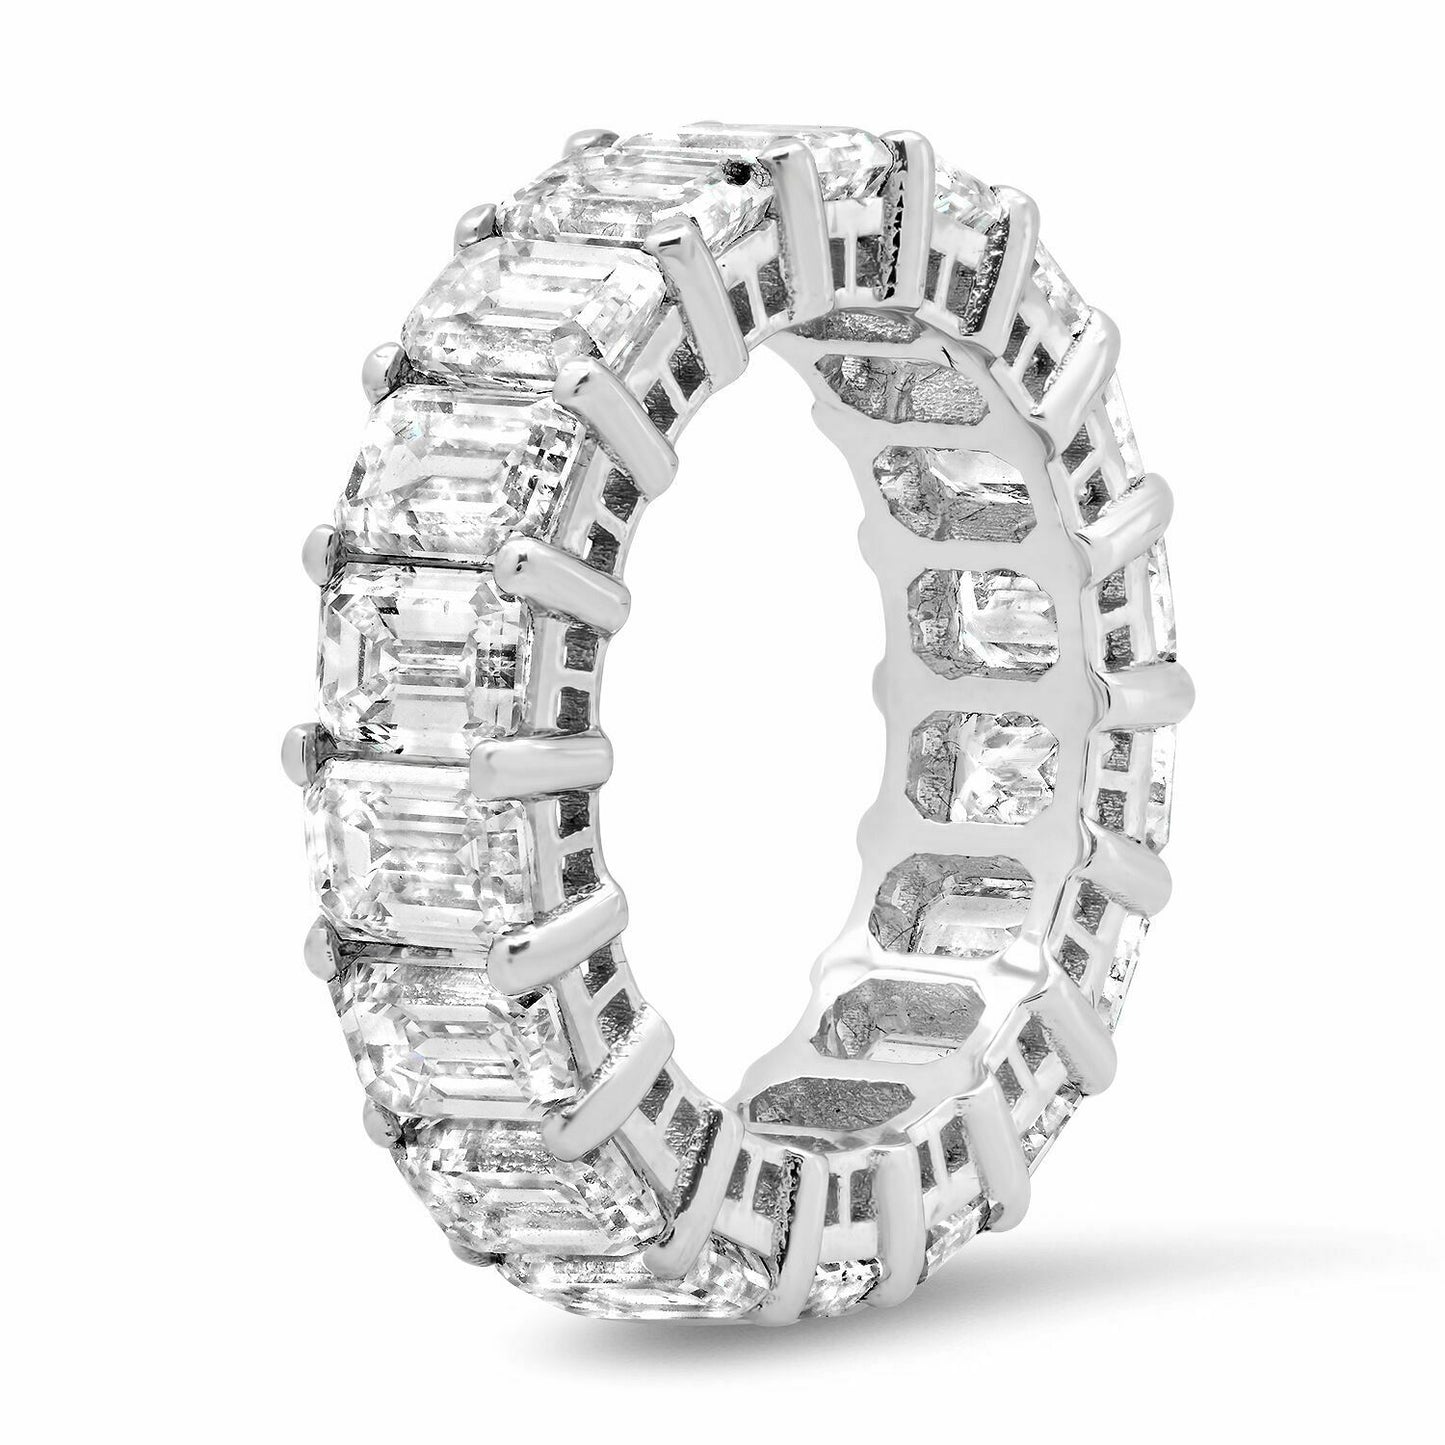 18K White Gold 9.06 CT Emerald Cut Diamond Eternity Ring  Engagement Band Natural